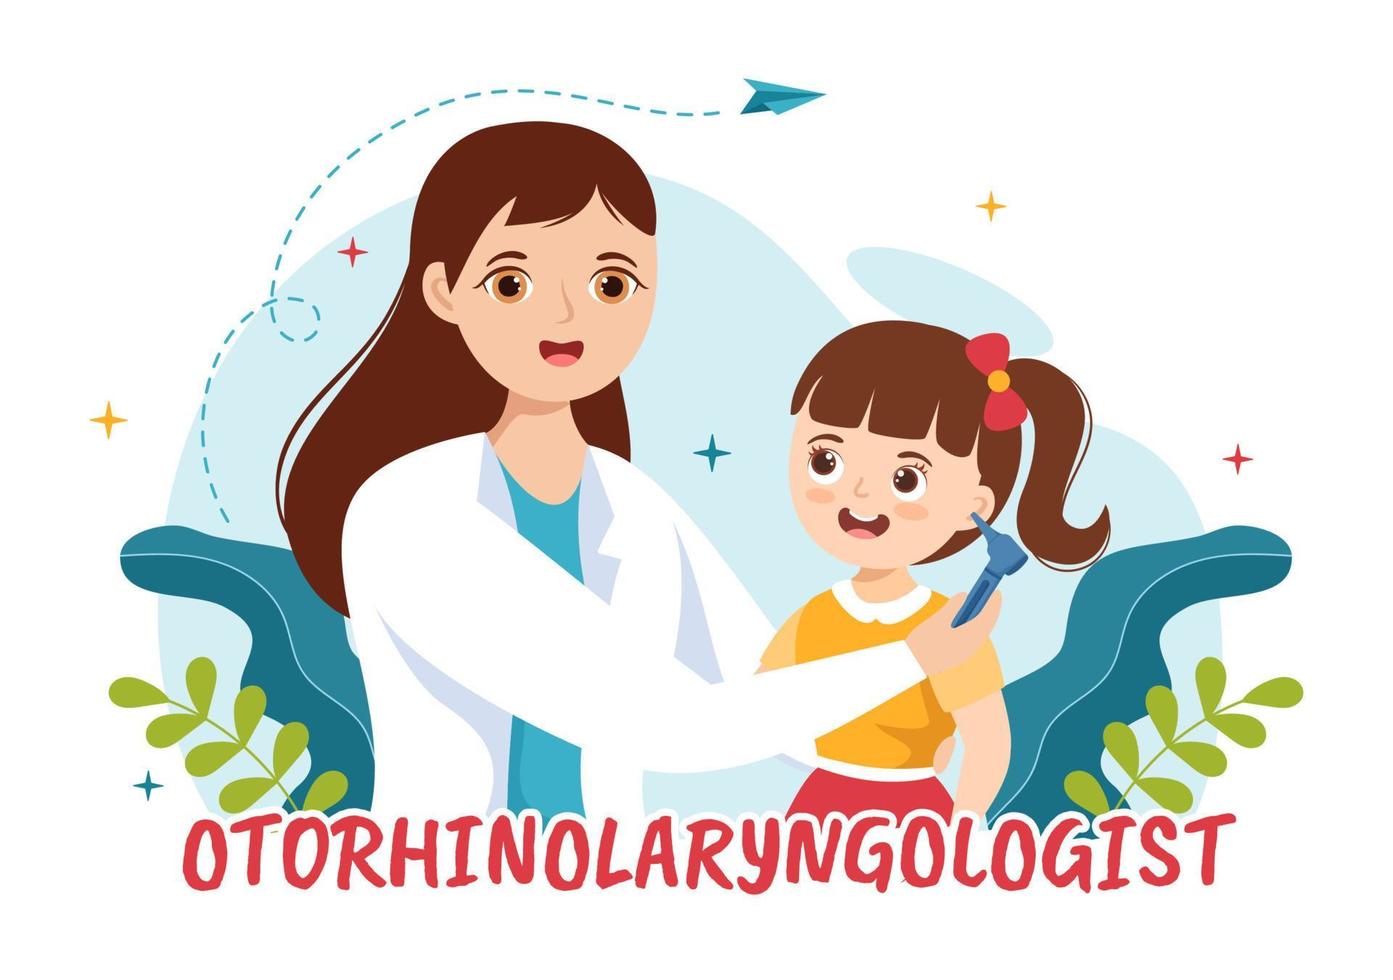 Otorhinolaryngologist Illustration with Medical Relating to the Ear, Nose and Throat in Kids Healthcare Cartoon Hand Drawn Landing Page Templates vector